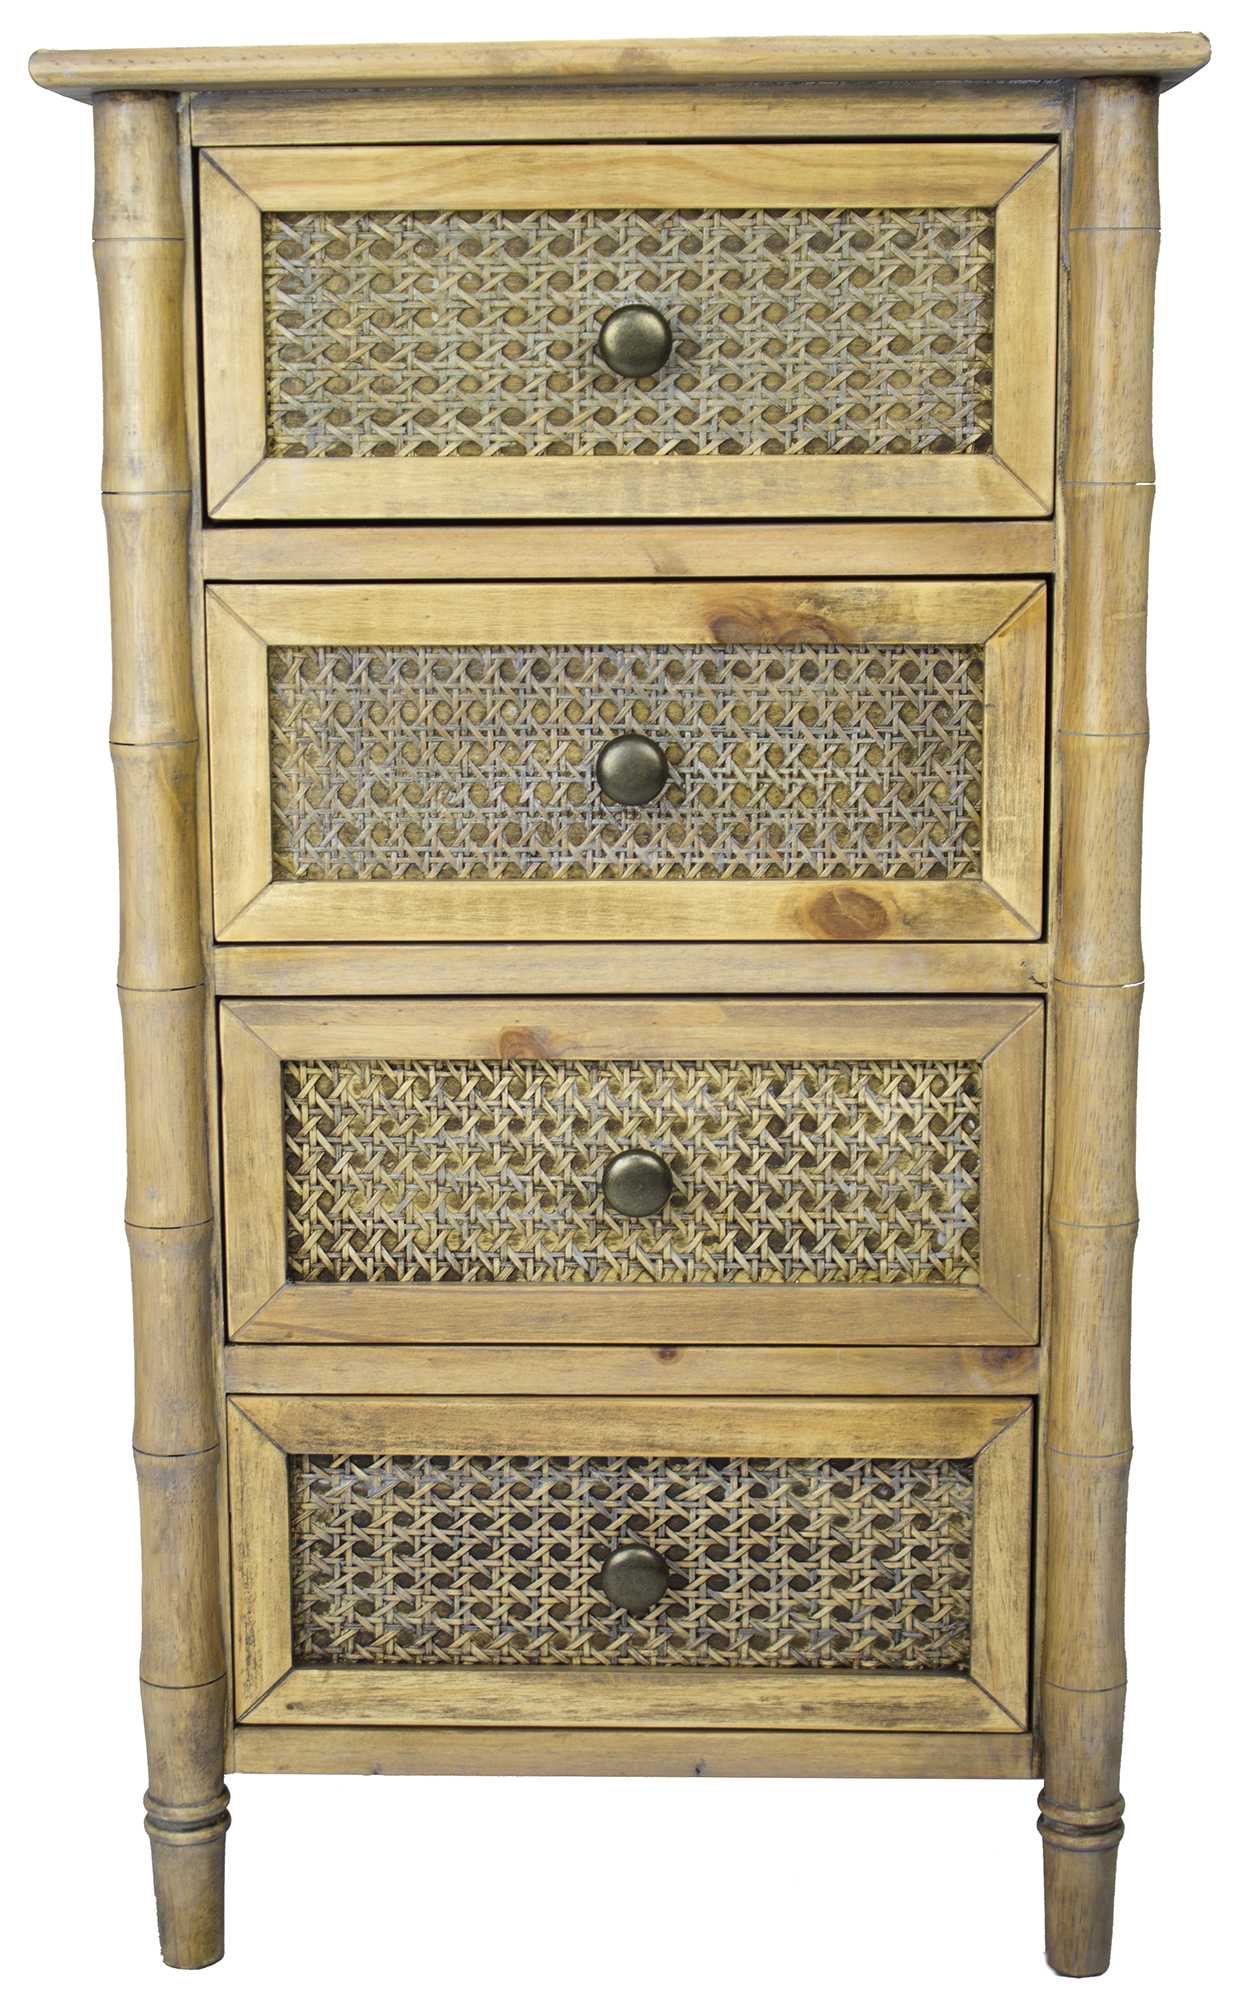 14" X 18" X 31.5" Rustic Wood Wood Pine Cane Cabinet with Drawers